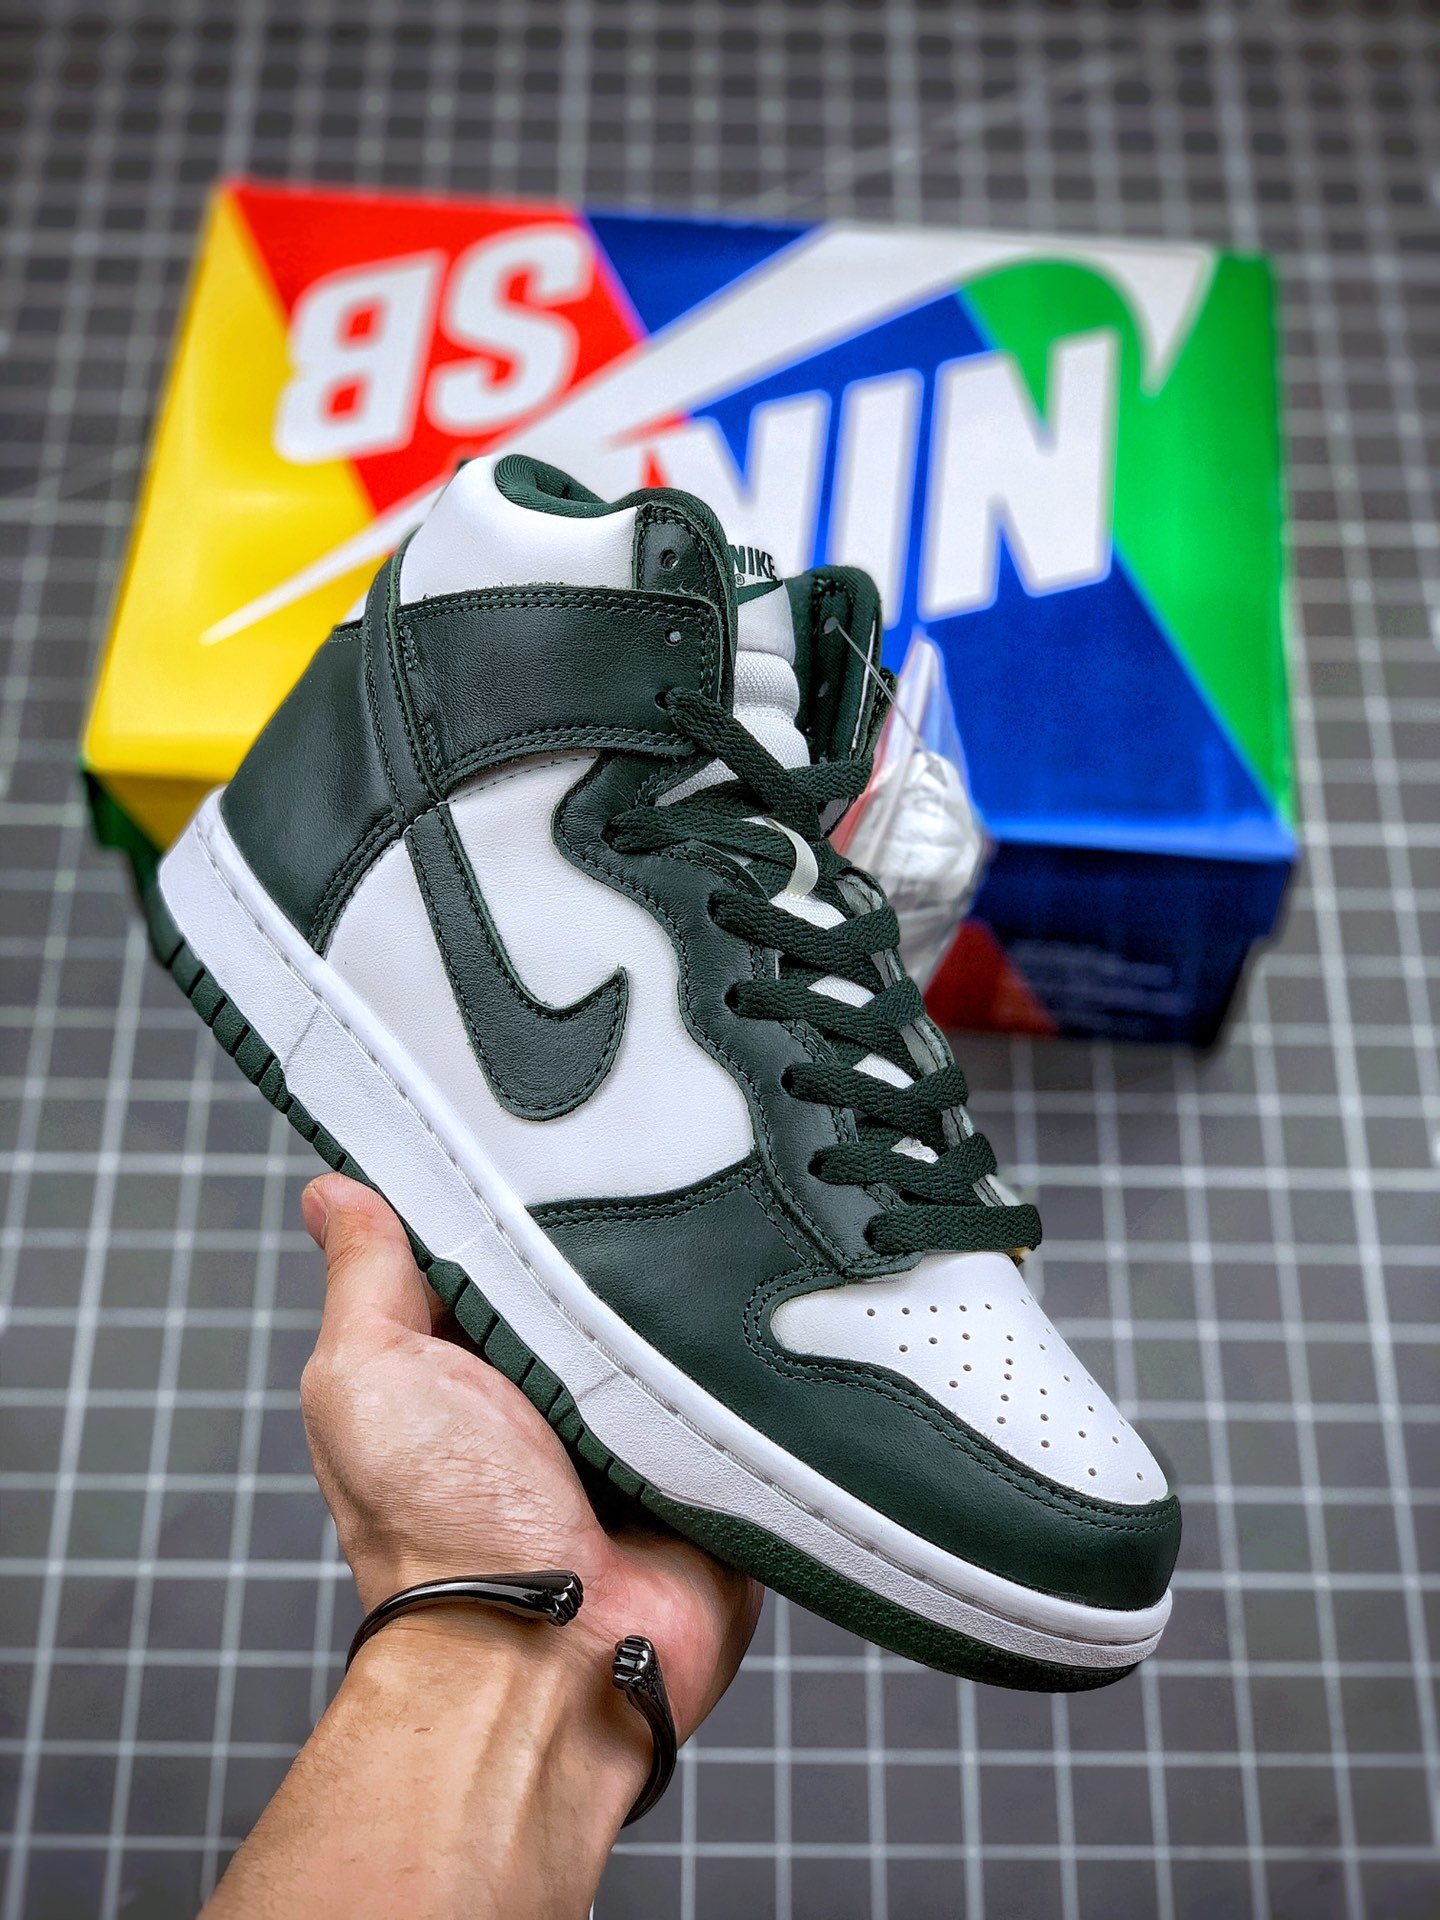 Nike Dunk High SP “Pro Green” CZ8149-100 For Sale – Sneaker Hello